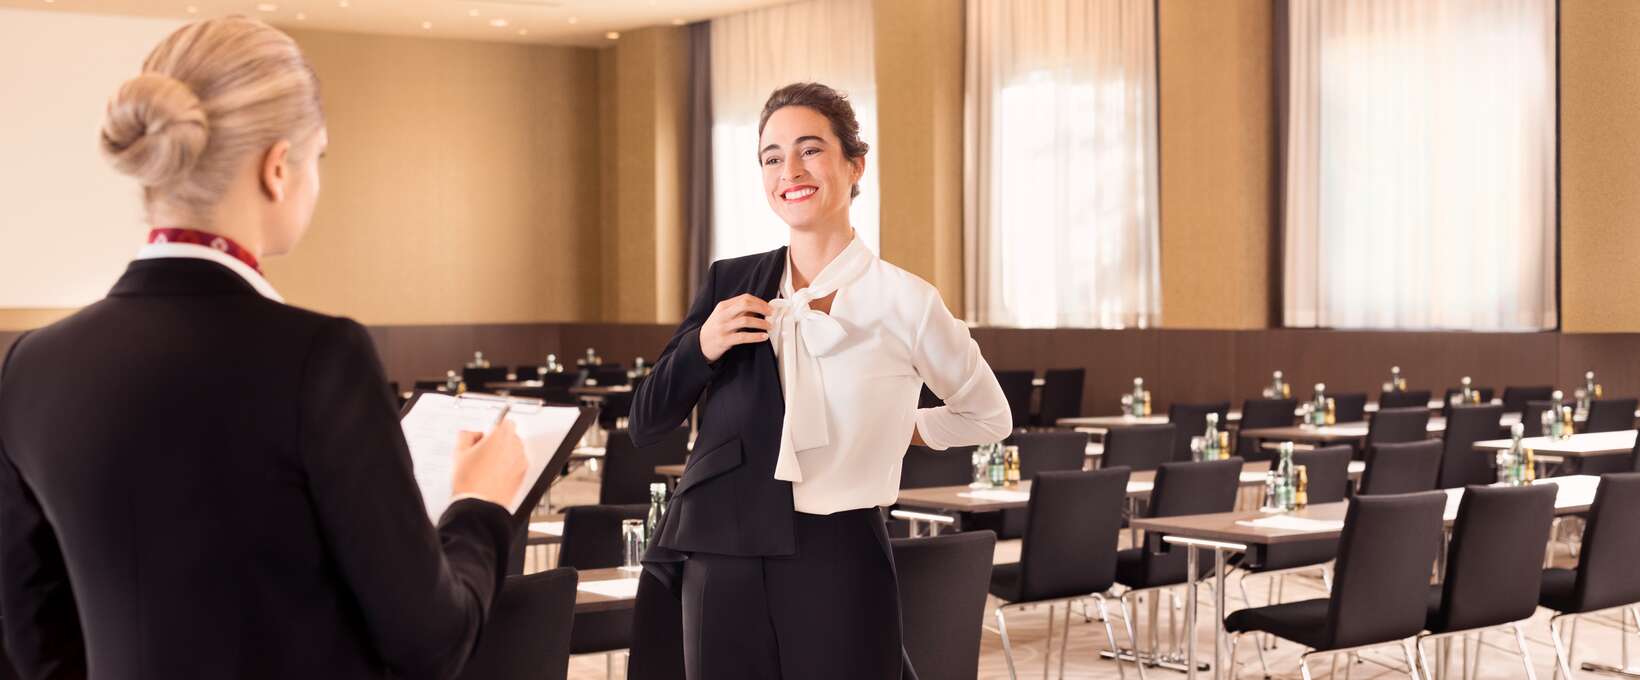  Woman in the seminar rooms | Austria Trend Hotels